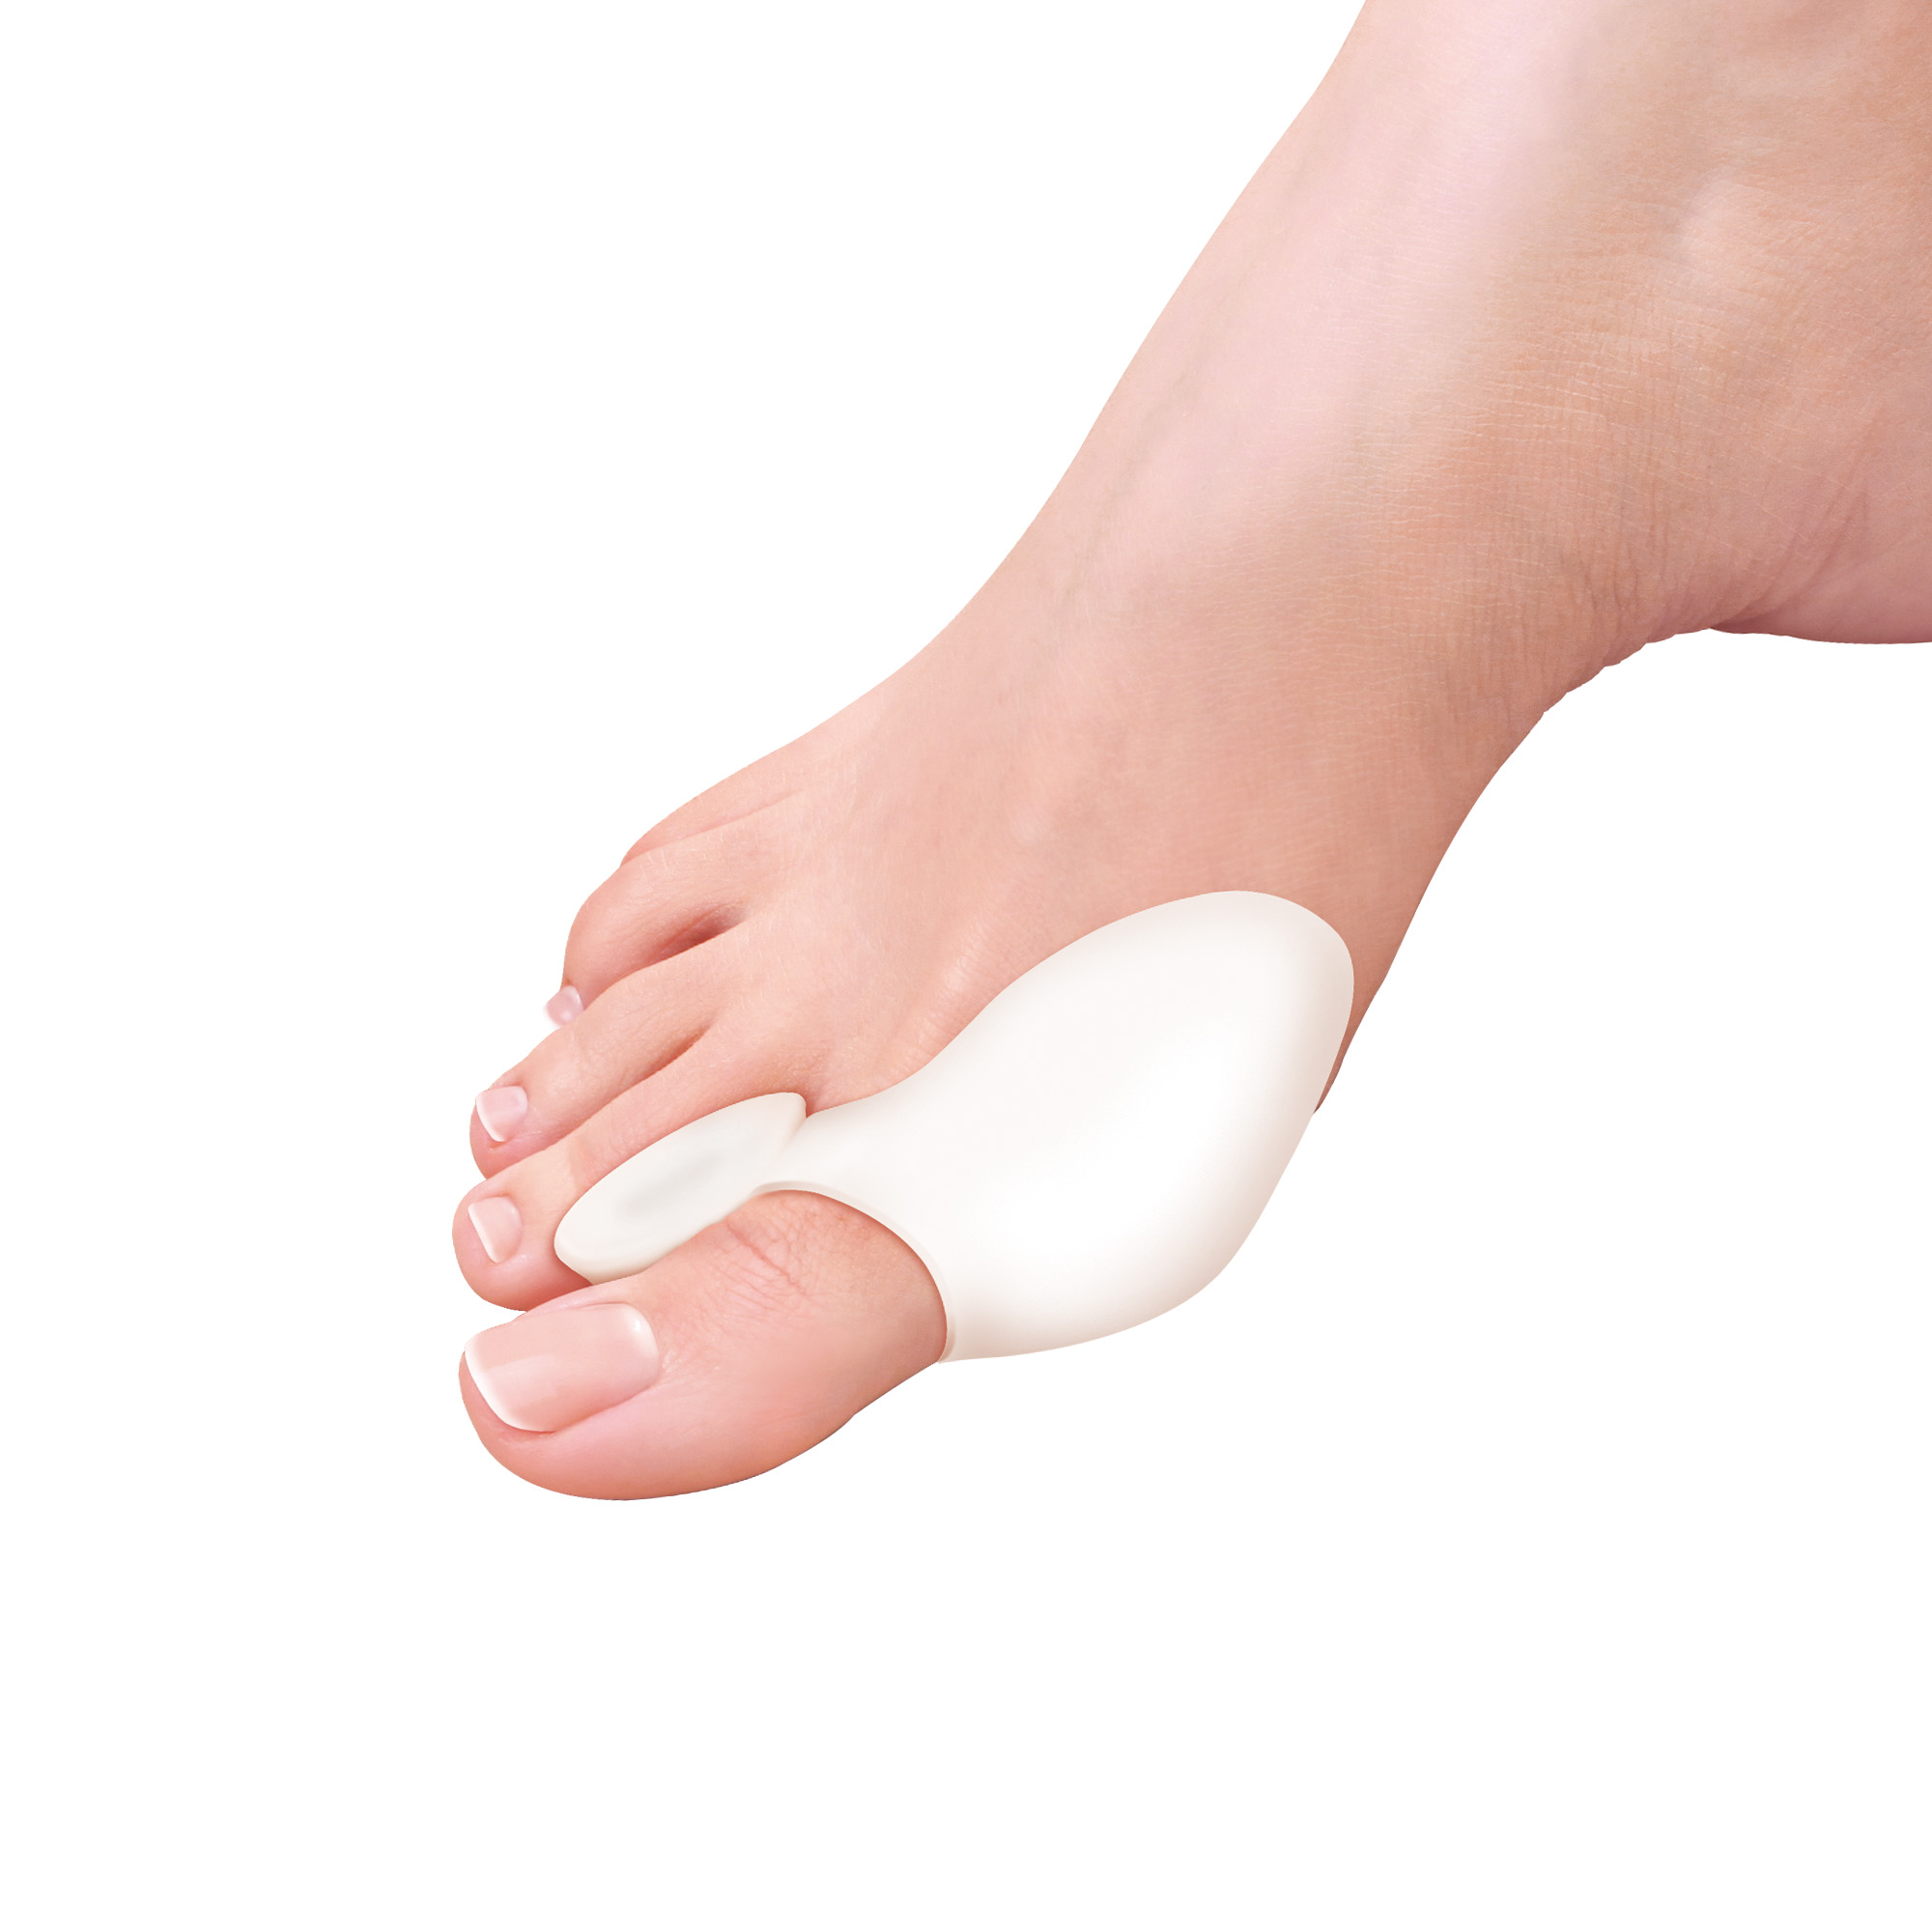 Alluxcare gel toe separator and protection 1 pc